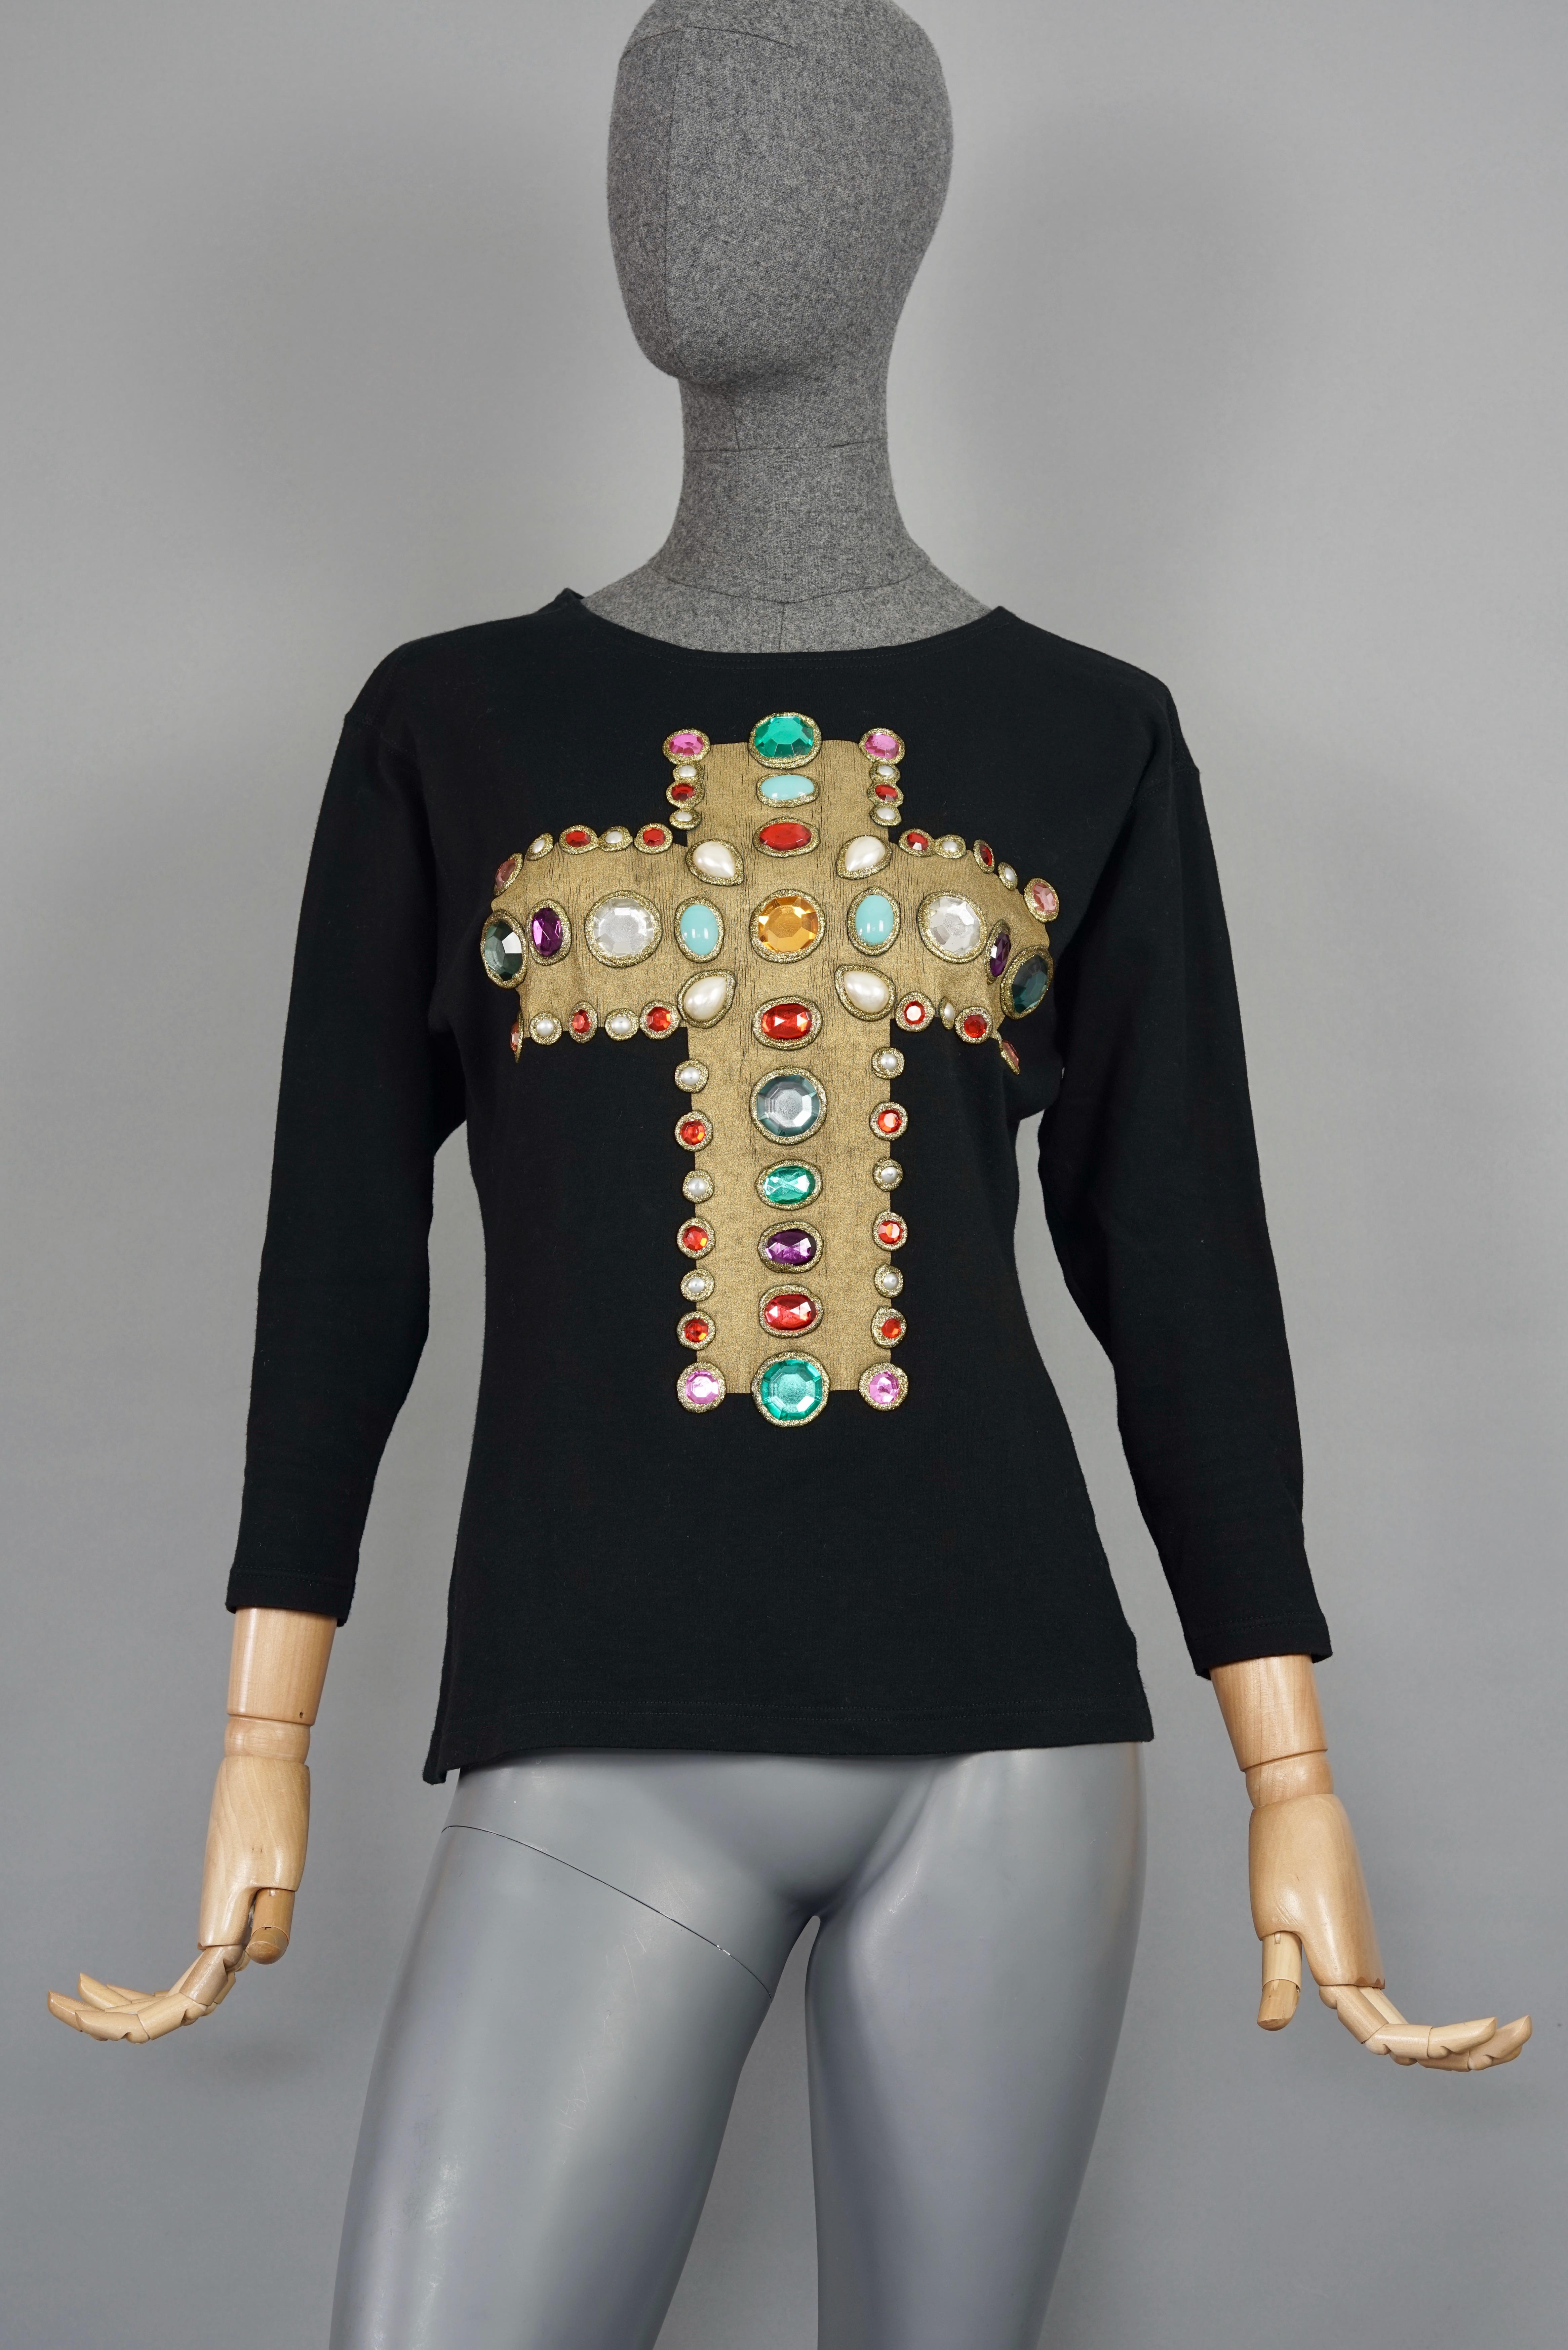 Vintage CHRISTIAN LACROIX Iconic Jewelled Cross Long Sleeves Shirt Top

Measurements taken laid flat, please double bust, waist and hips:
Shoulder: 17.71 inches (45 cm)
Bust: 16.92 inches (43 cm)
Bust: 19.29 inches (49 cm)
Waist: 14.56 inches (37